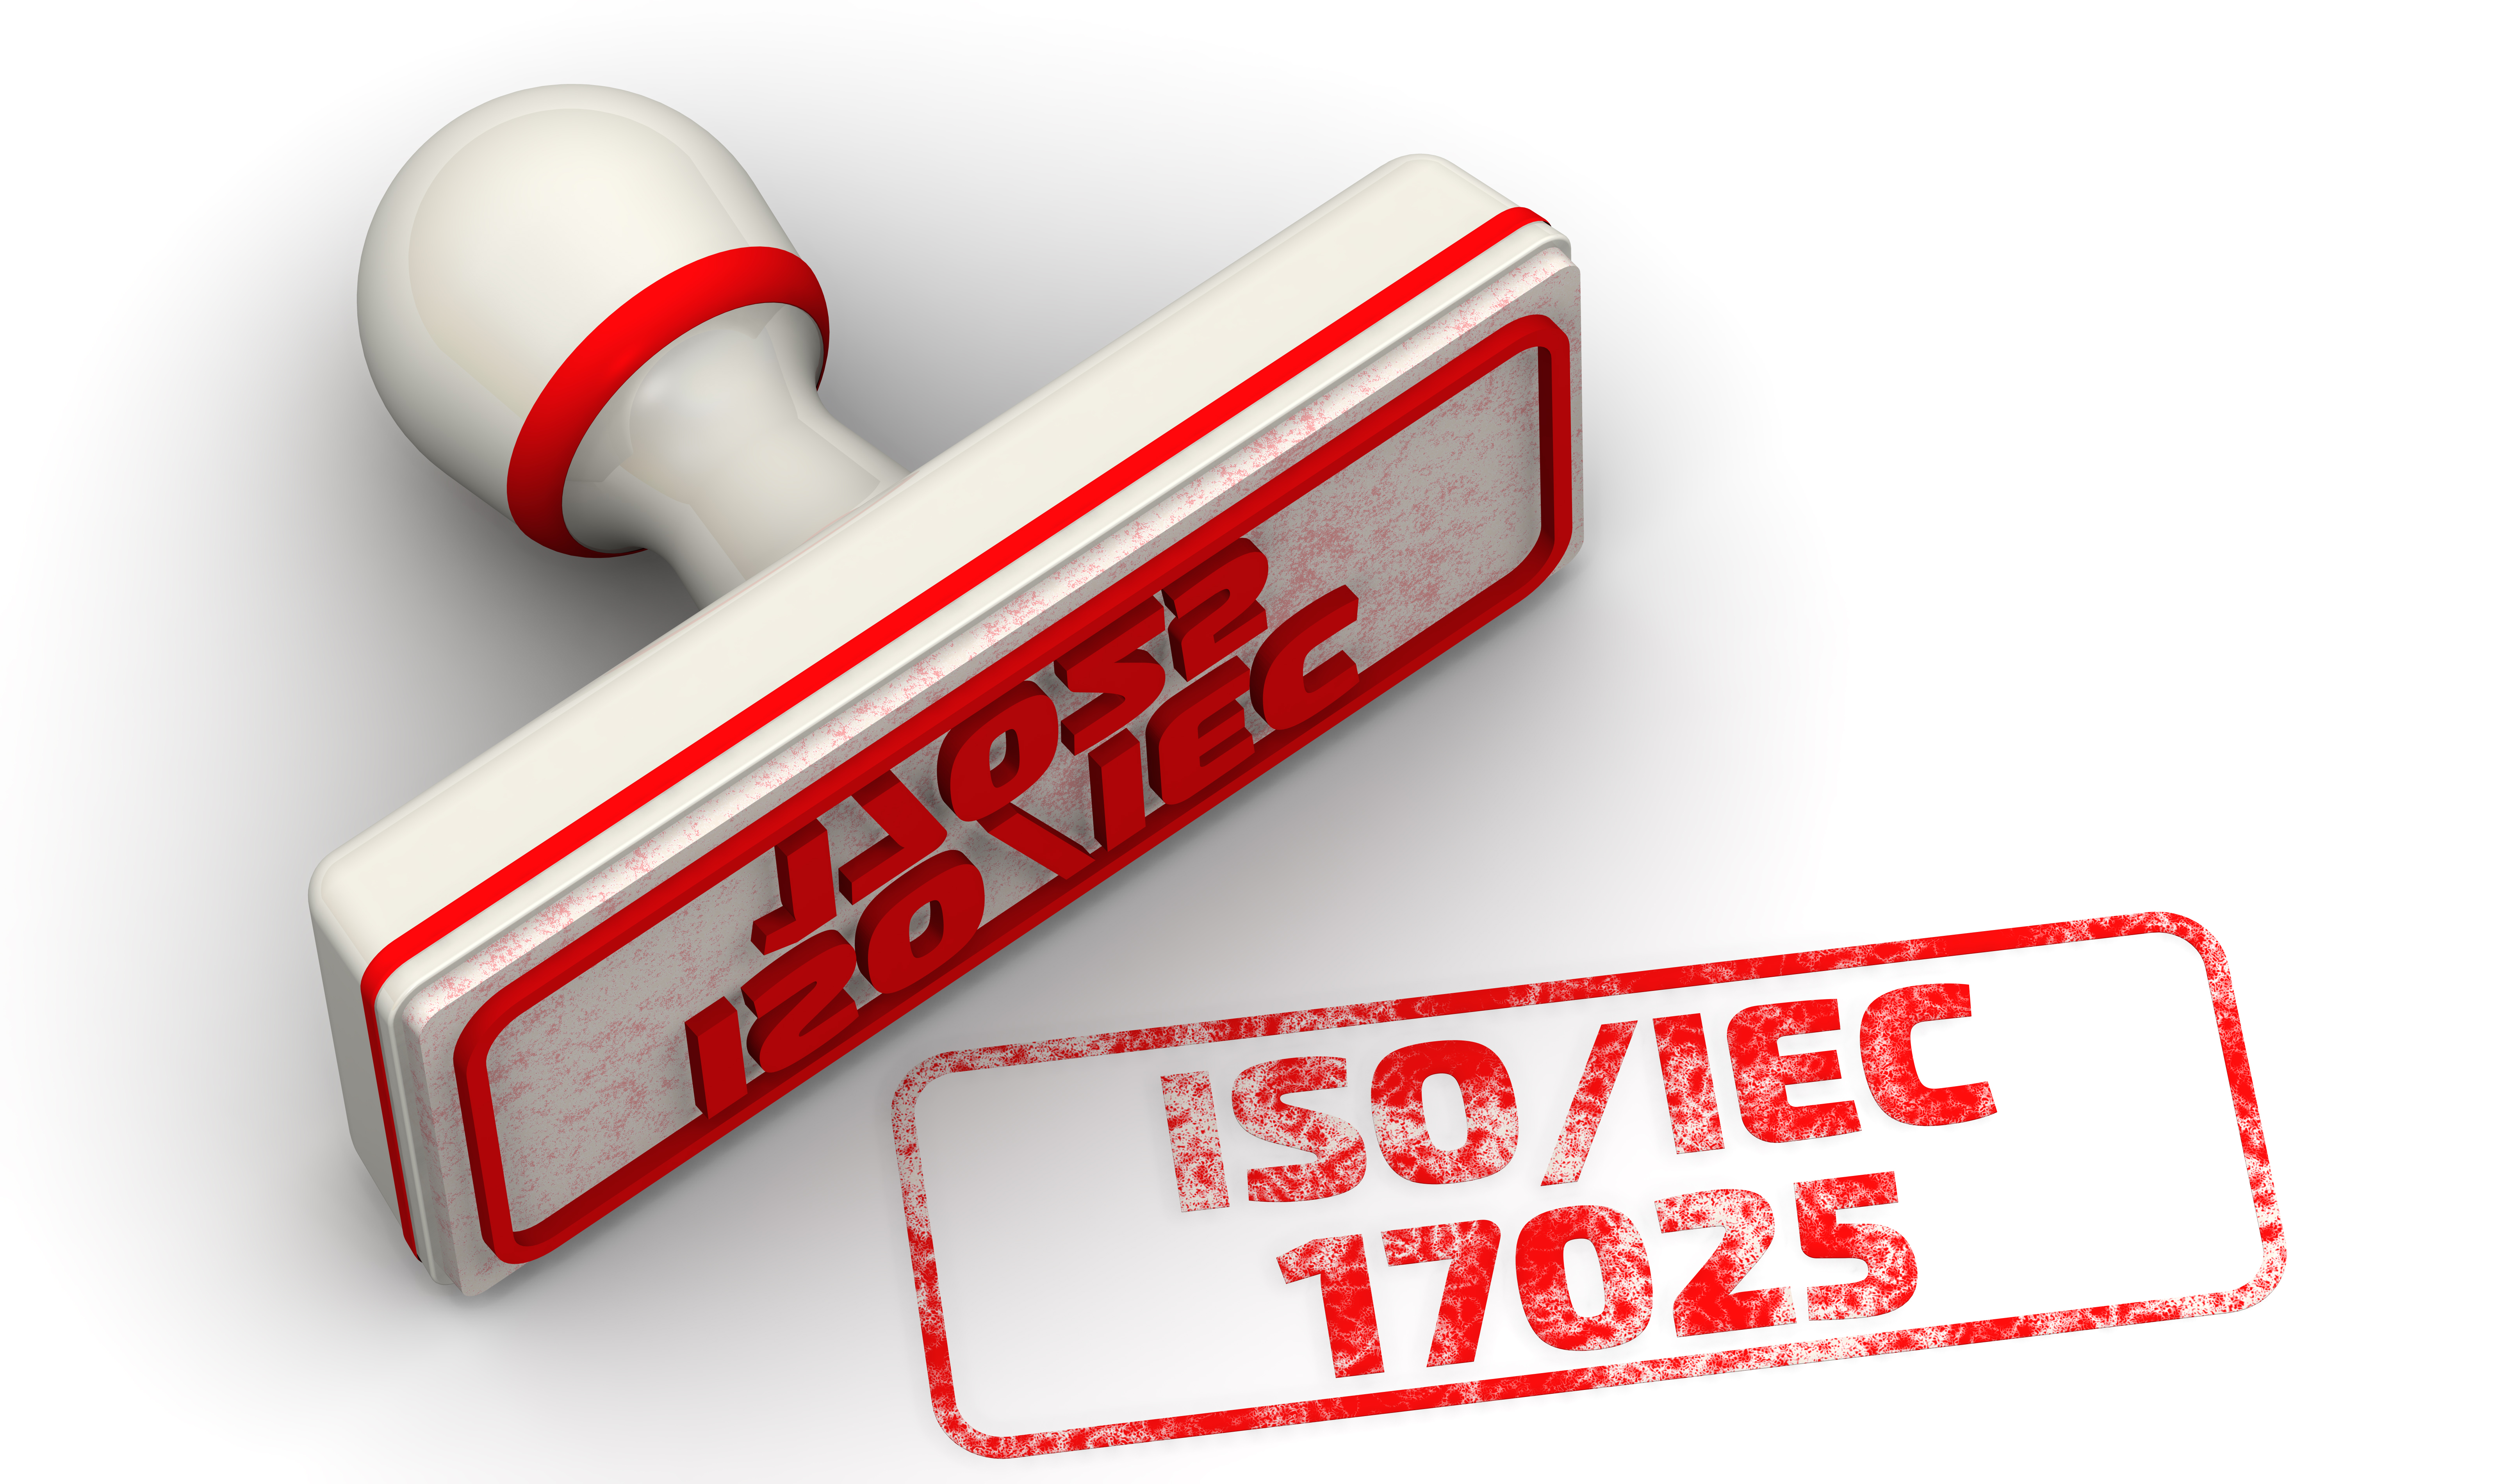 ISO/IEC stamp